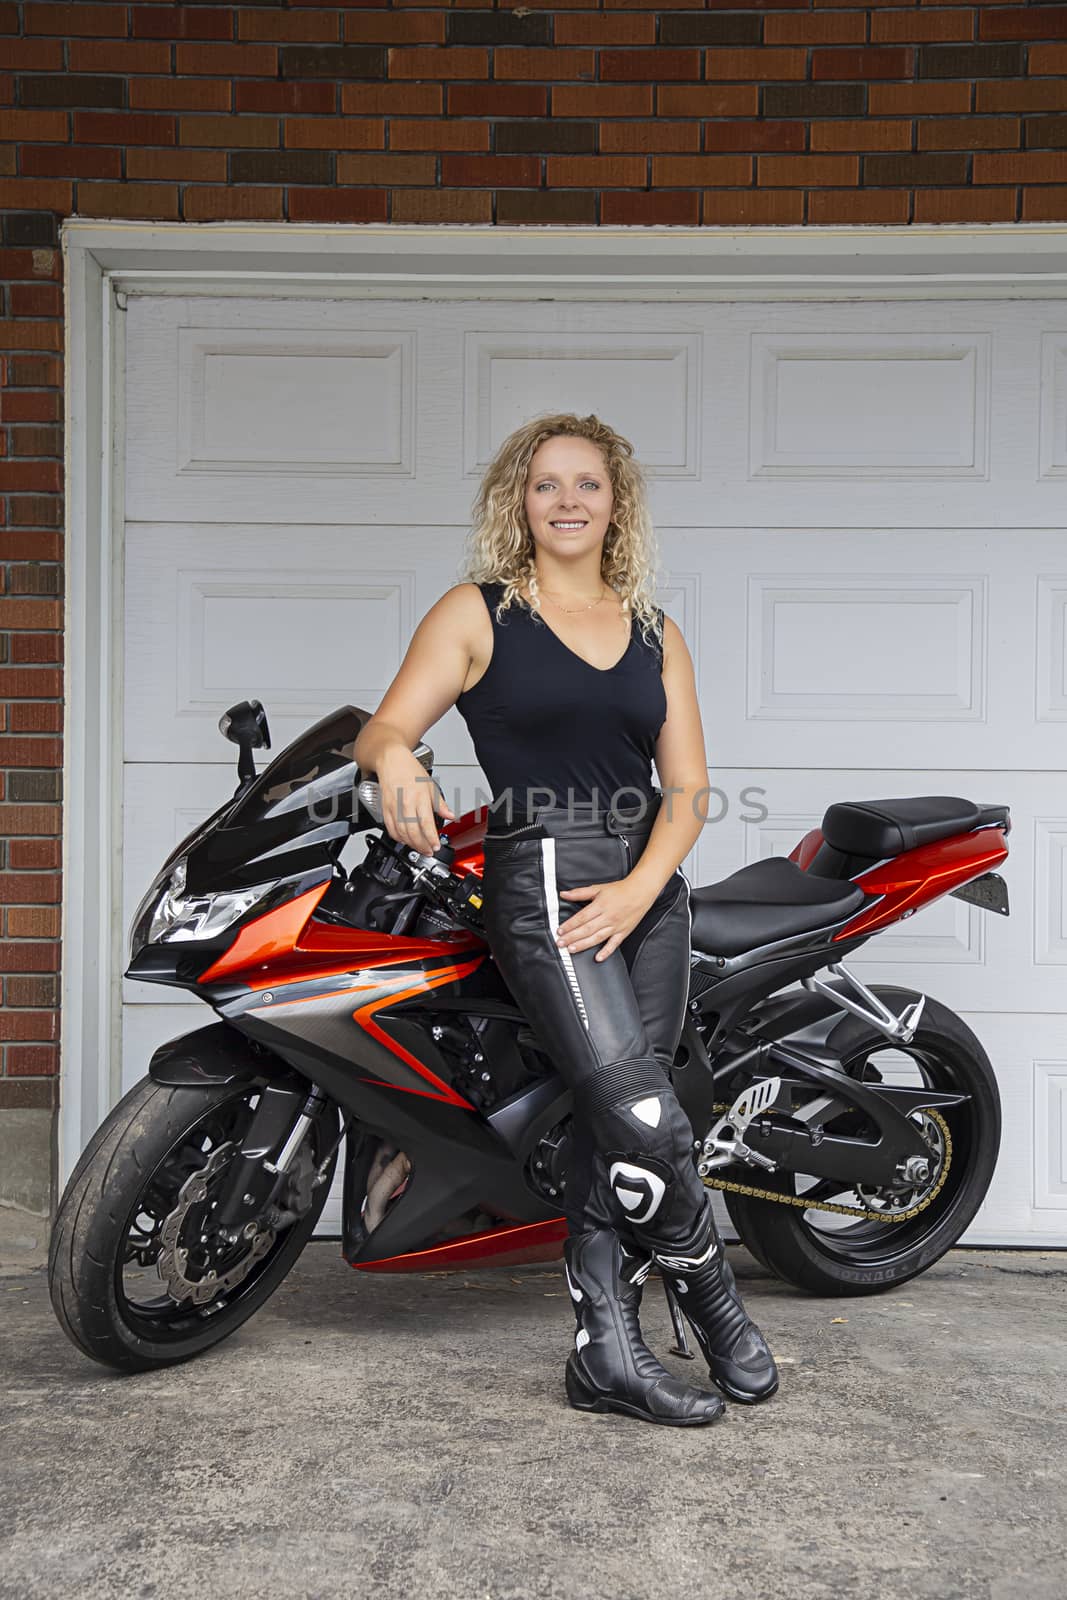 Twenty something blond woman, standing in front of her motocyle